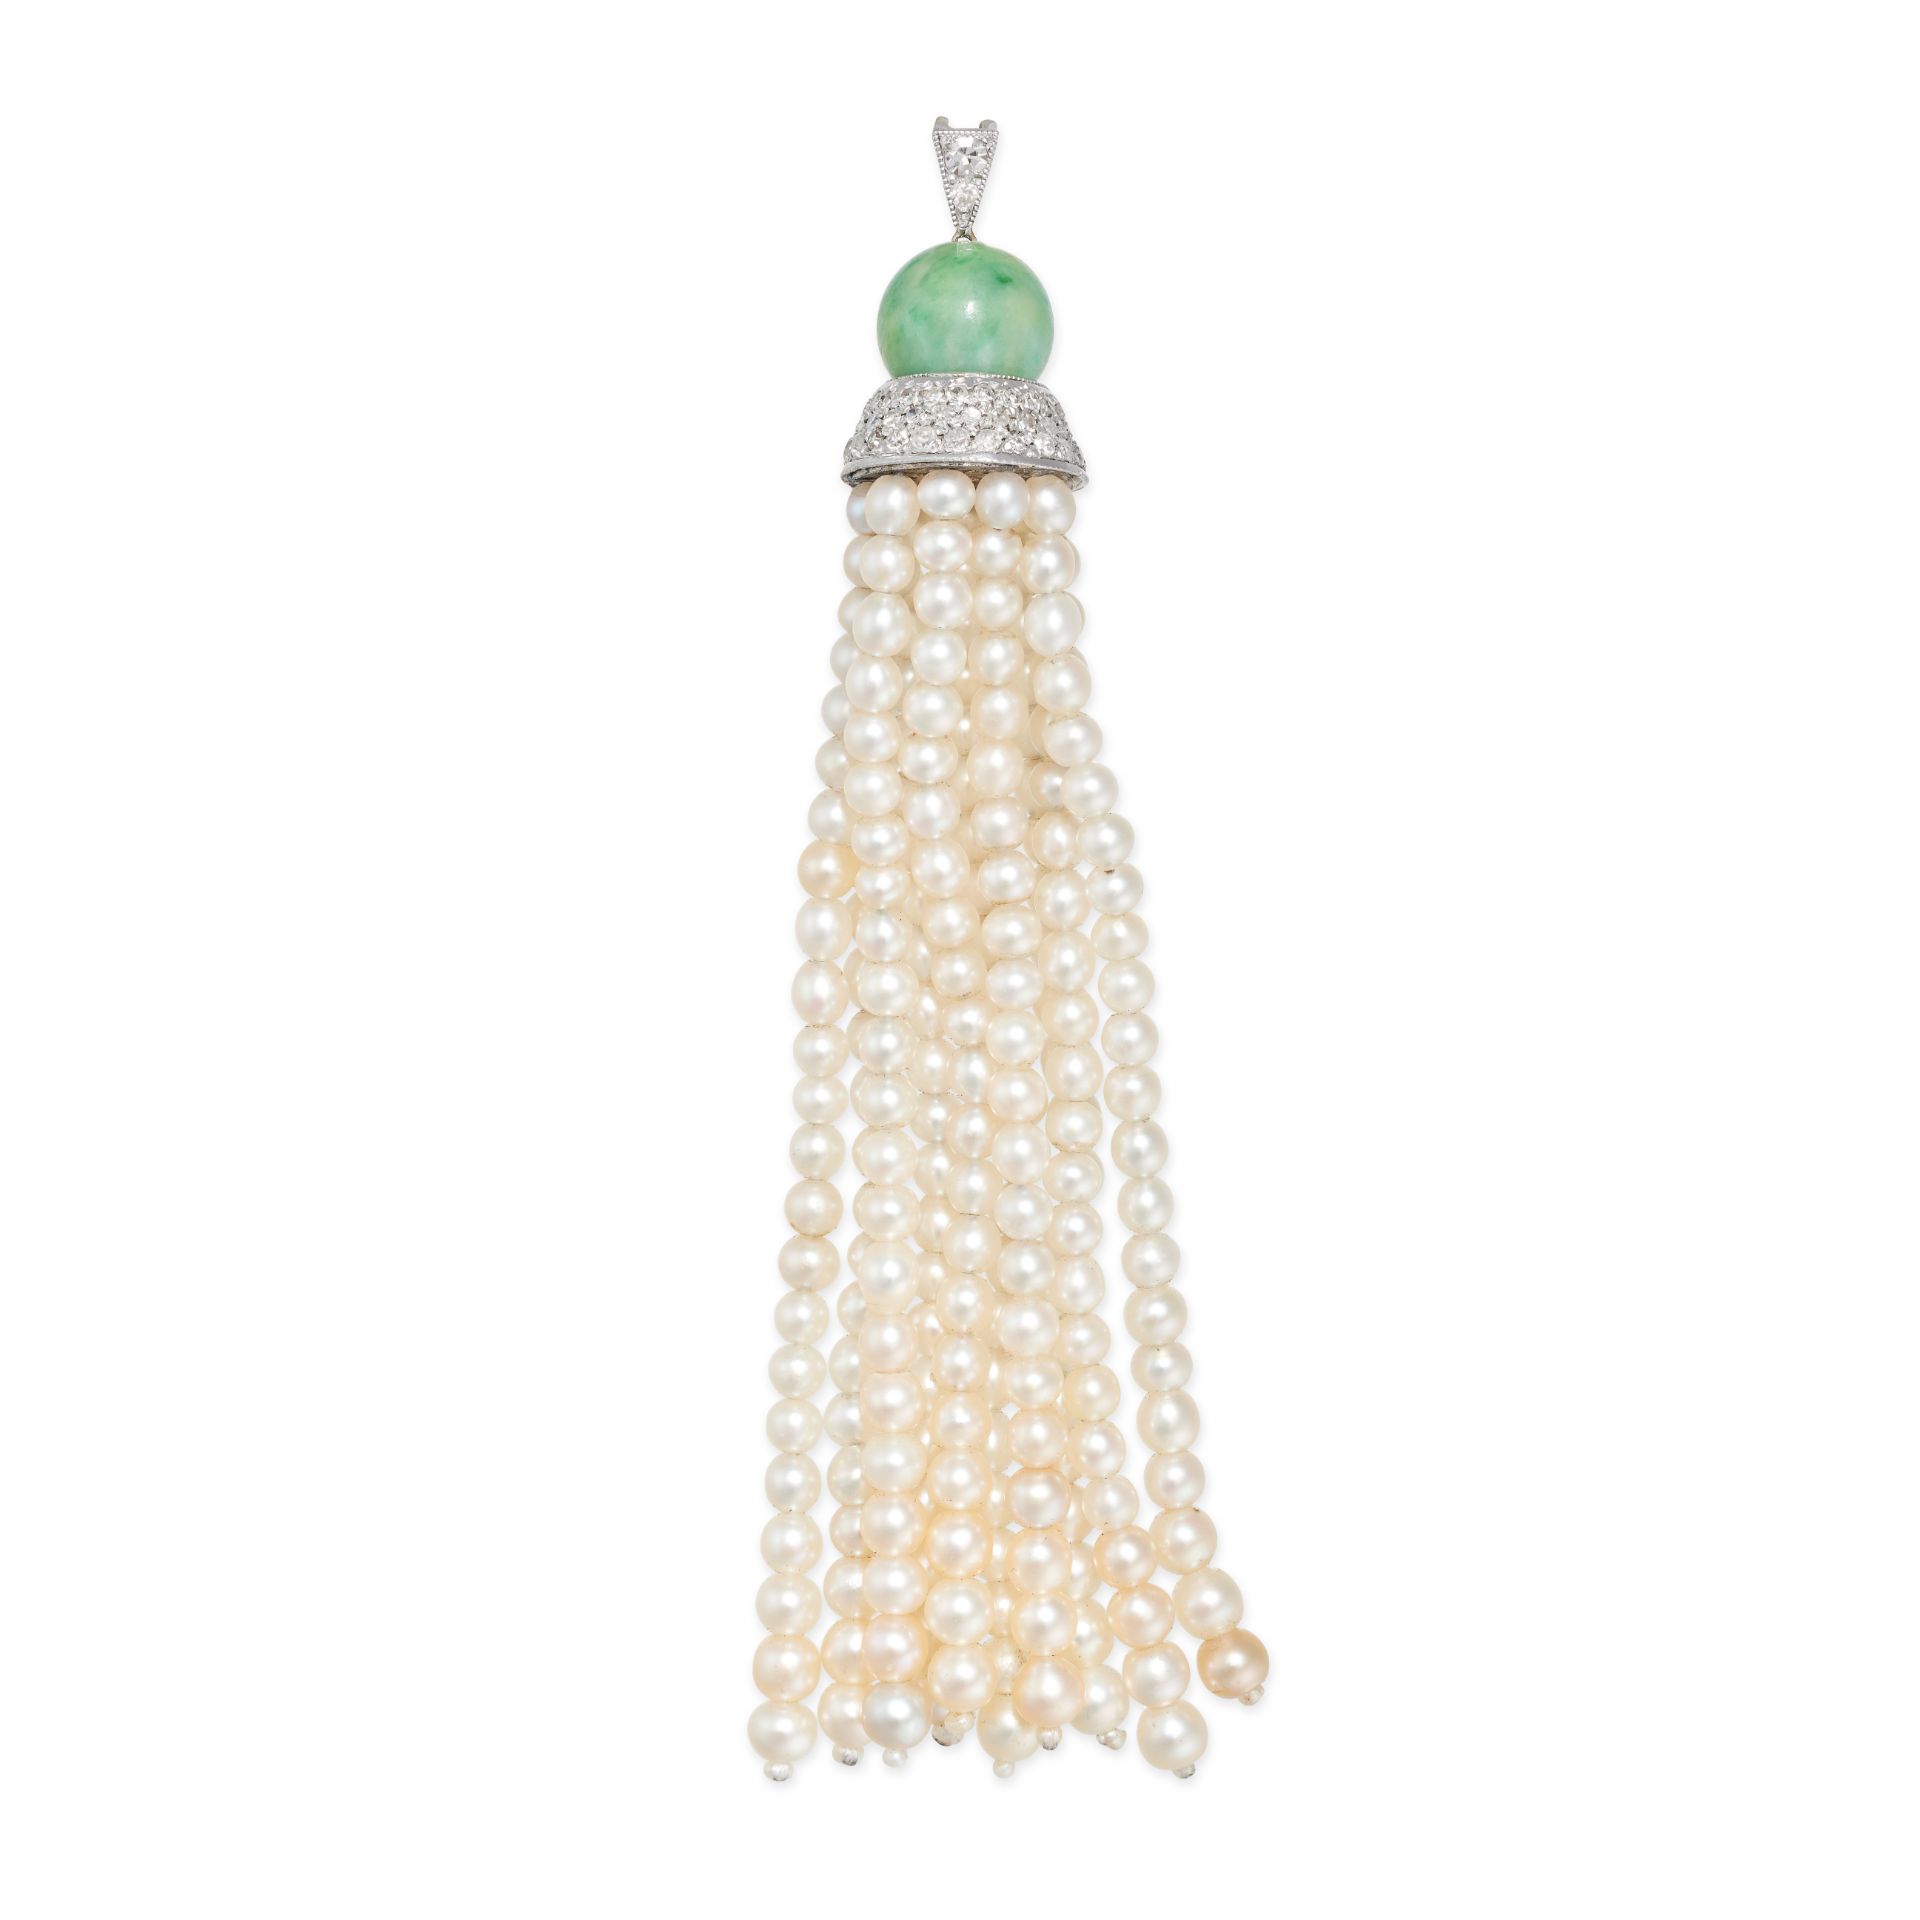 A NATURAL SALTWATER PEARL, JADEITE JADE AND DIAMOND TASSEL PENDANT in platinum and white gold, co...